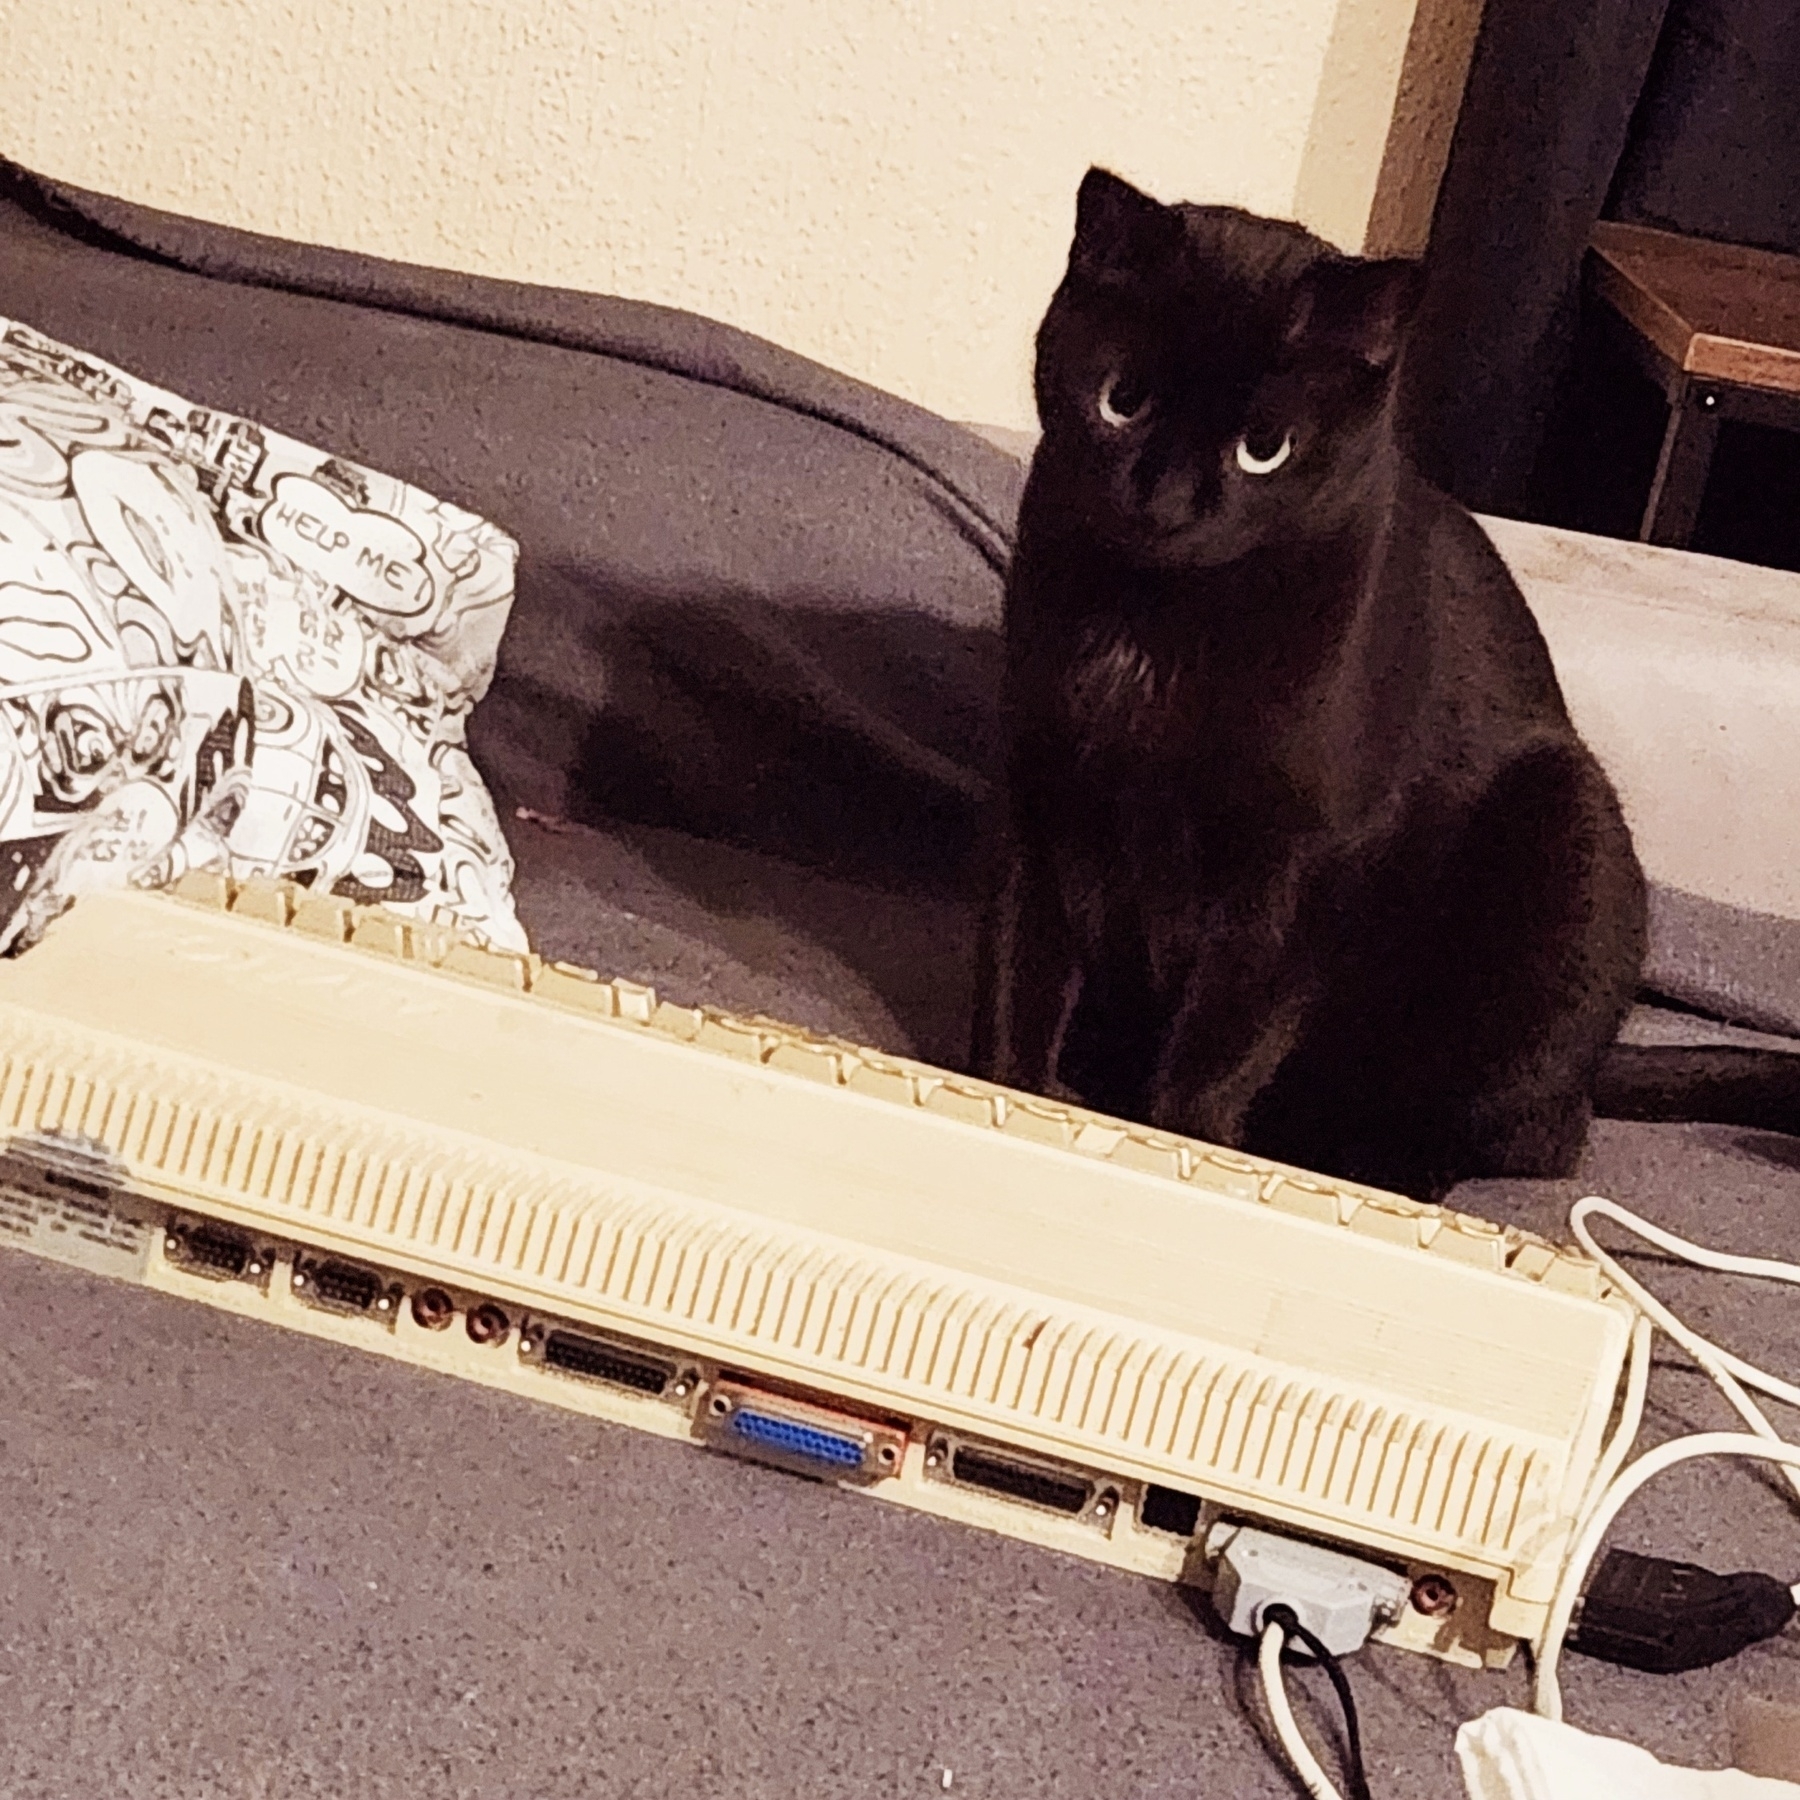 Black cat sitting in front of an amiga 500